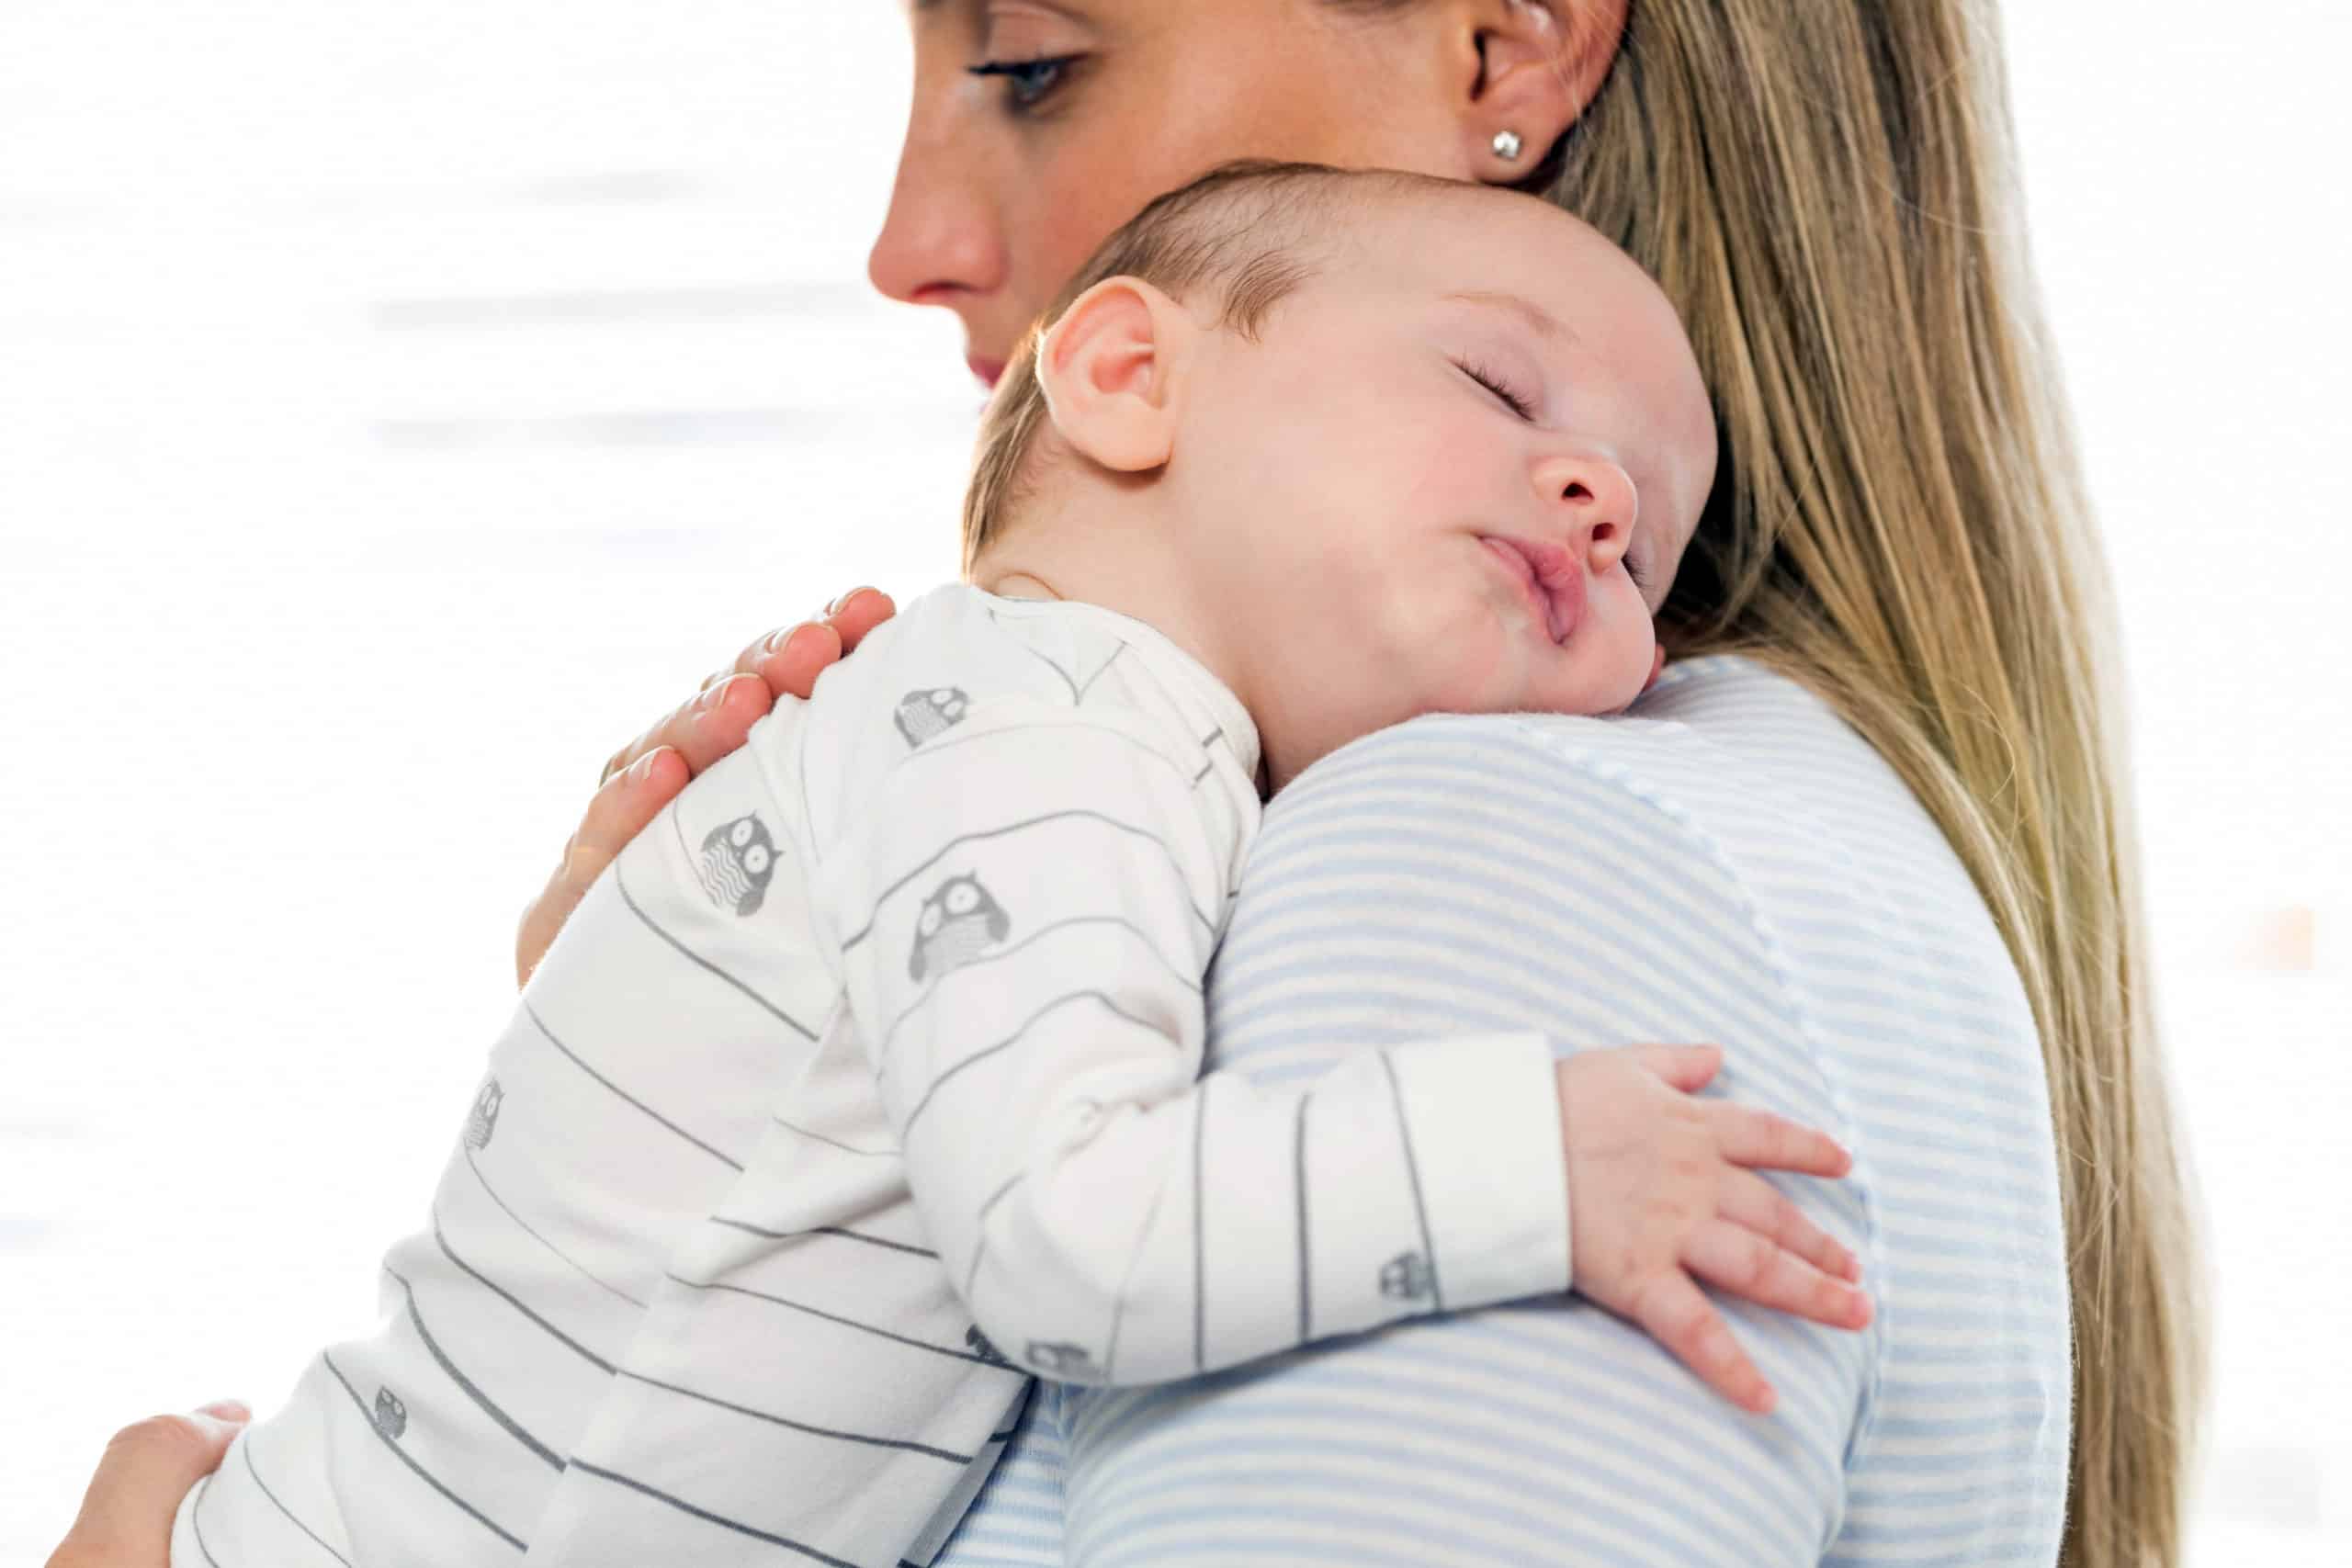 Healthcare case study, mother holding a baby